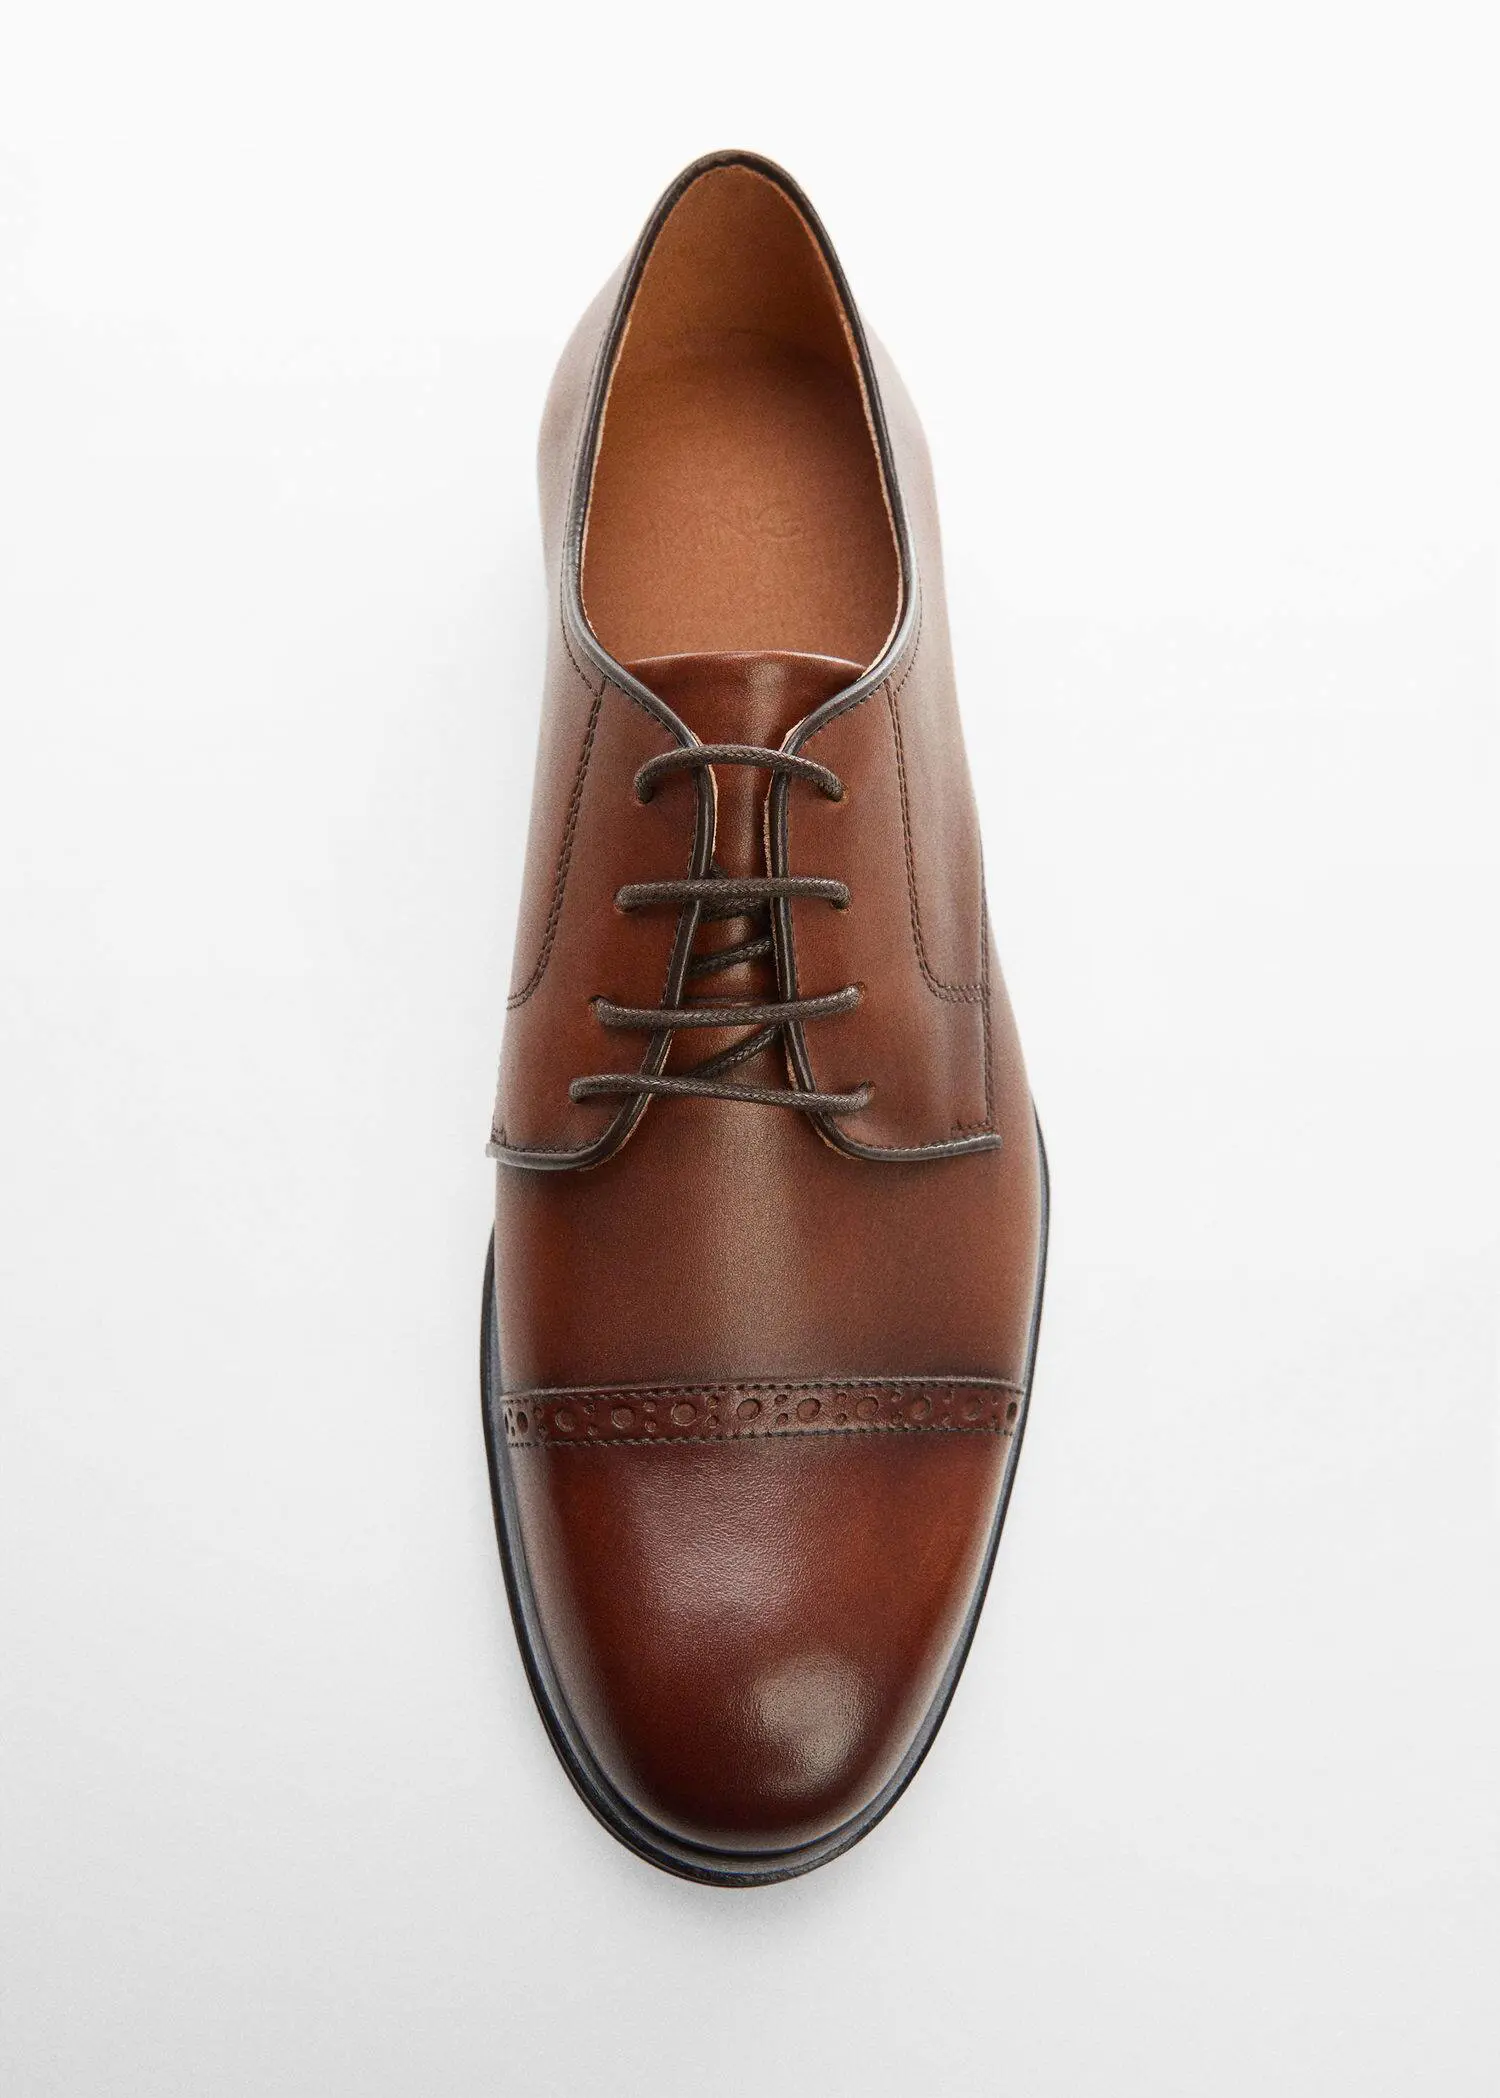 Mango Leather suit shoes. a pair of brown leather shoes on a white background. 